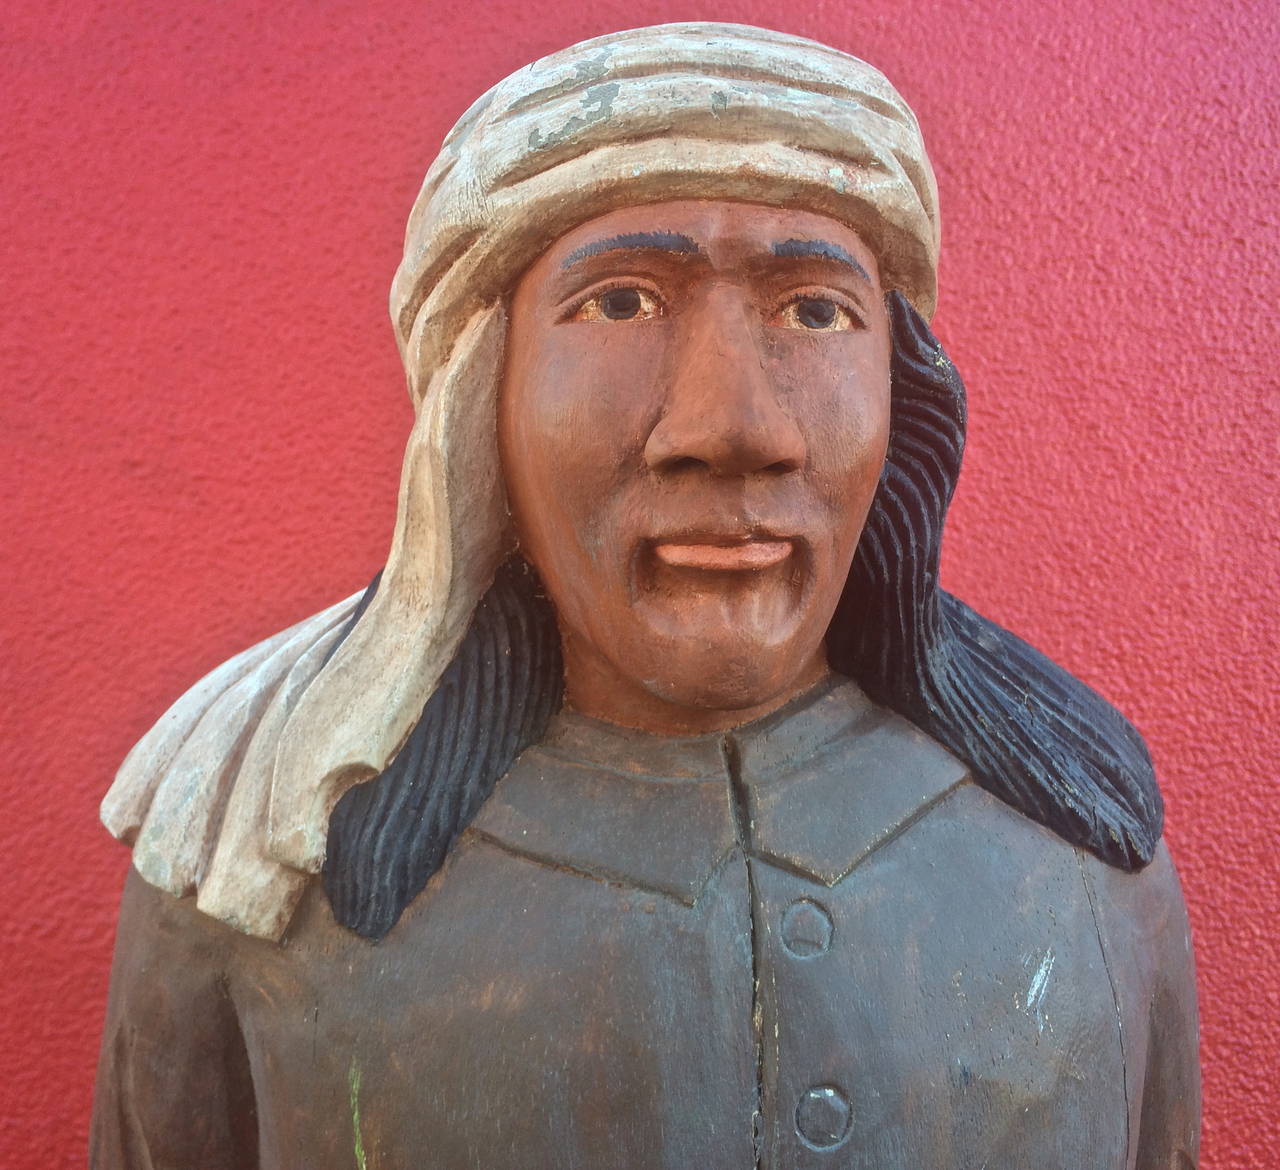 American Carved Wooden Figure of Apache Indian Geronimo in Chains